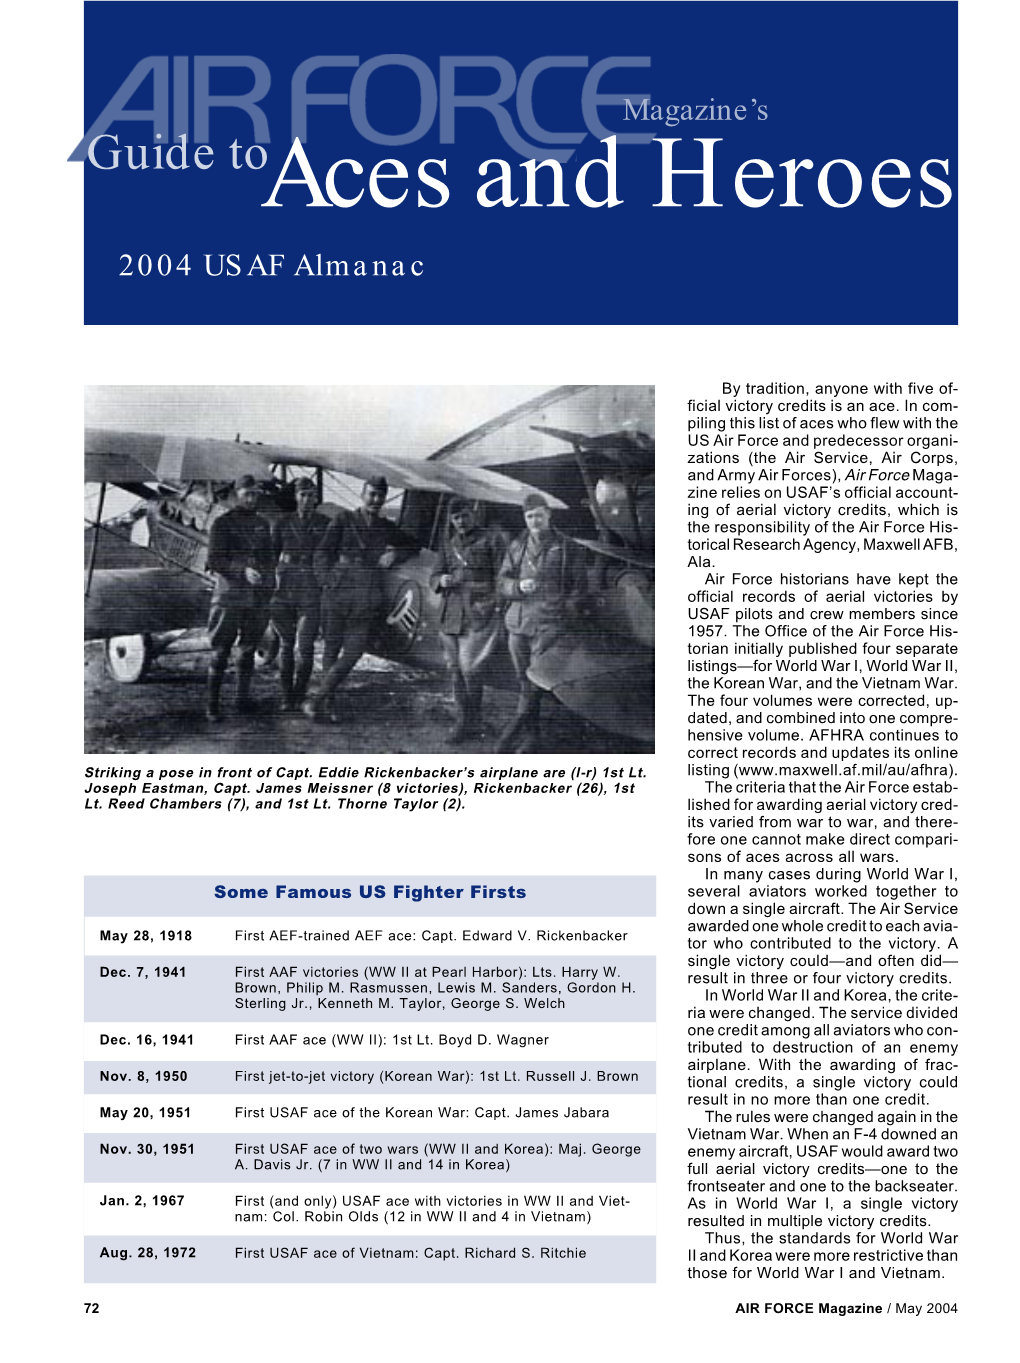 Aces and Heroes ■ 2004 USAF Almanac